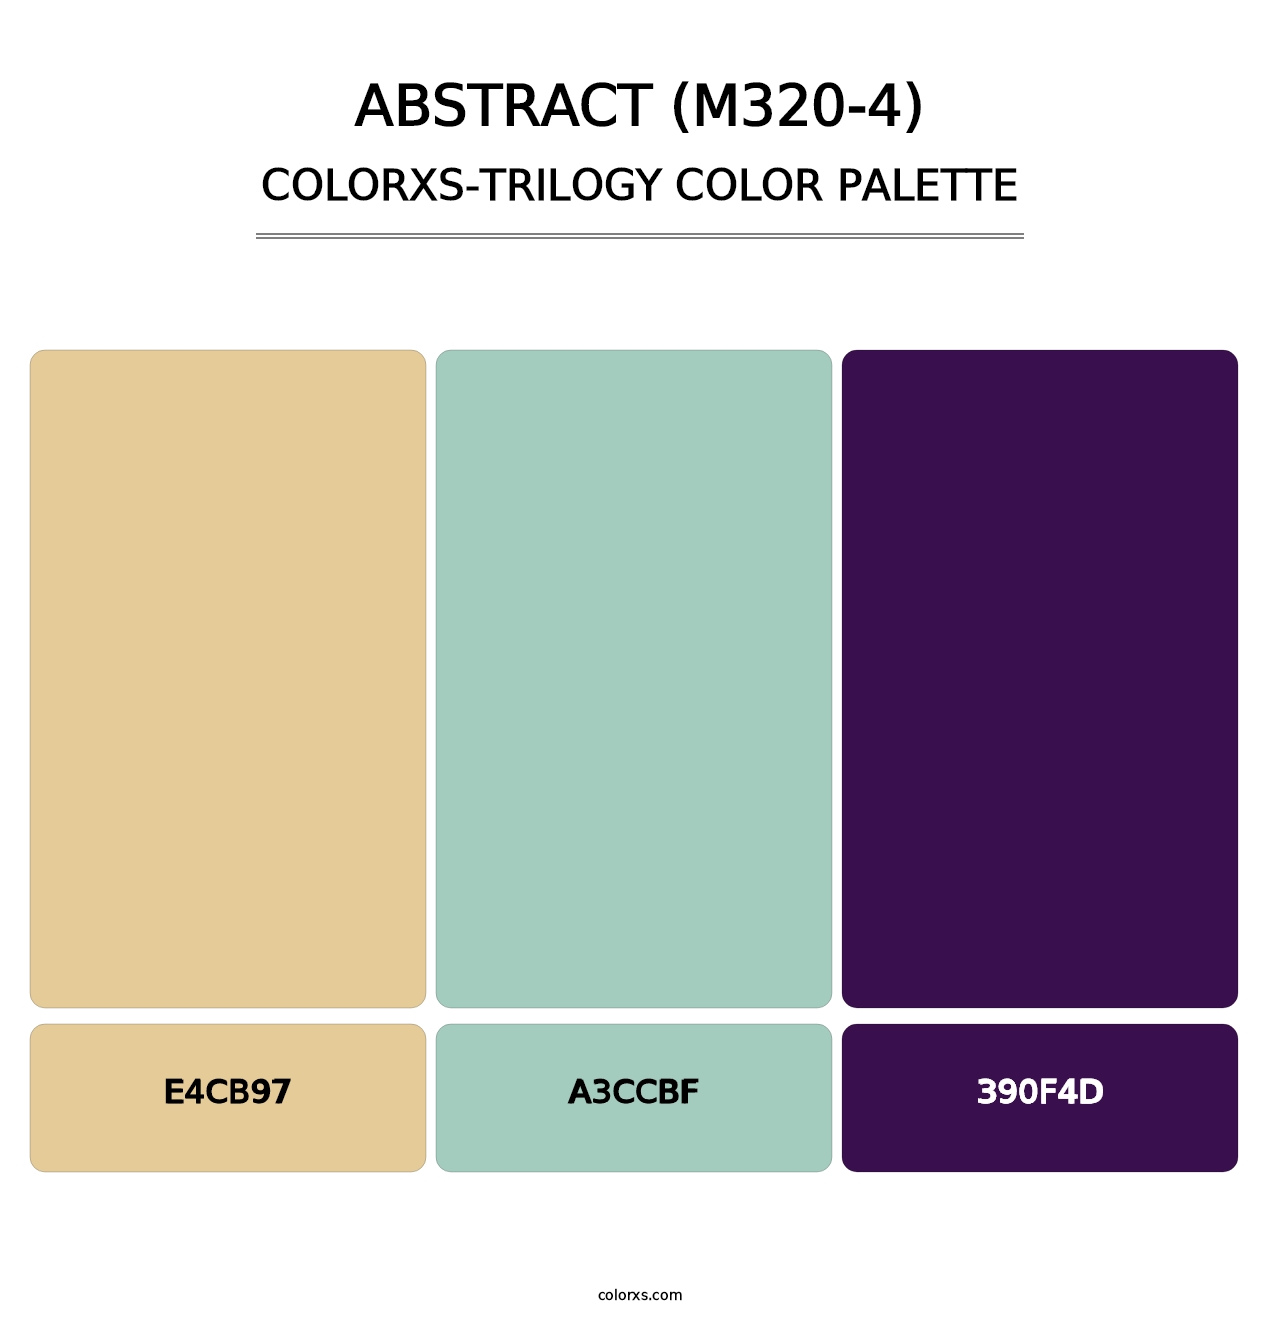 Abstract (M320-4) - Colorxs Trilogy Palette